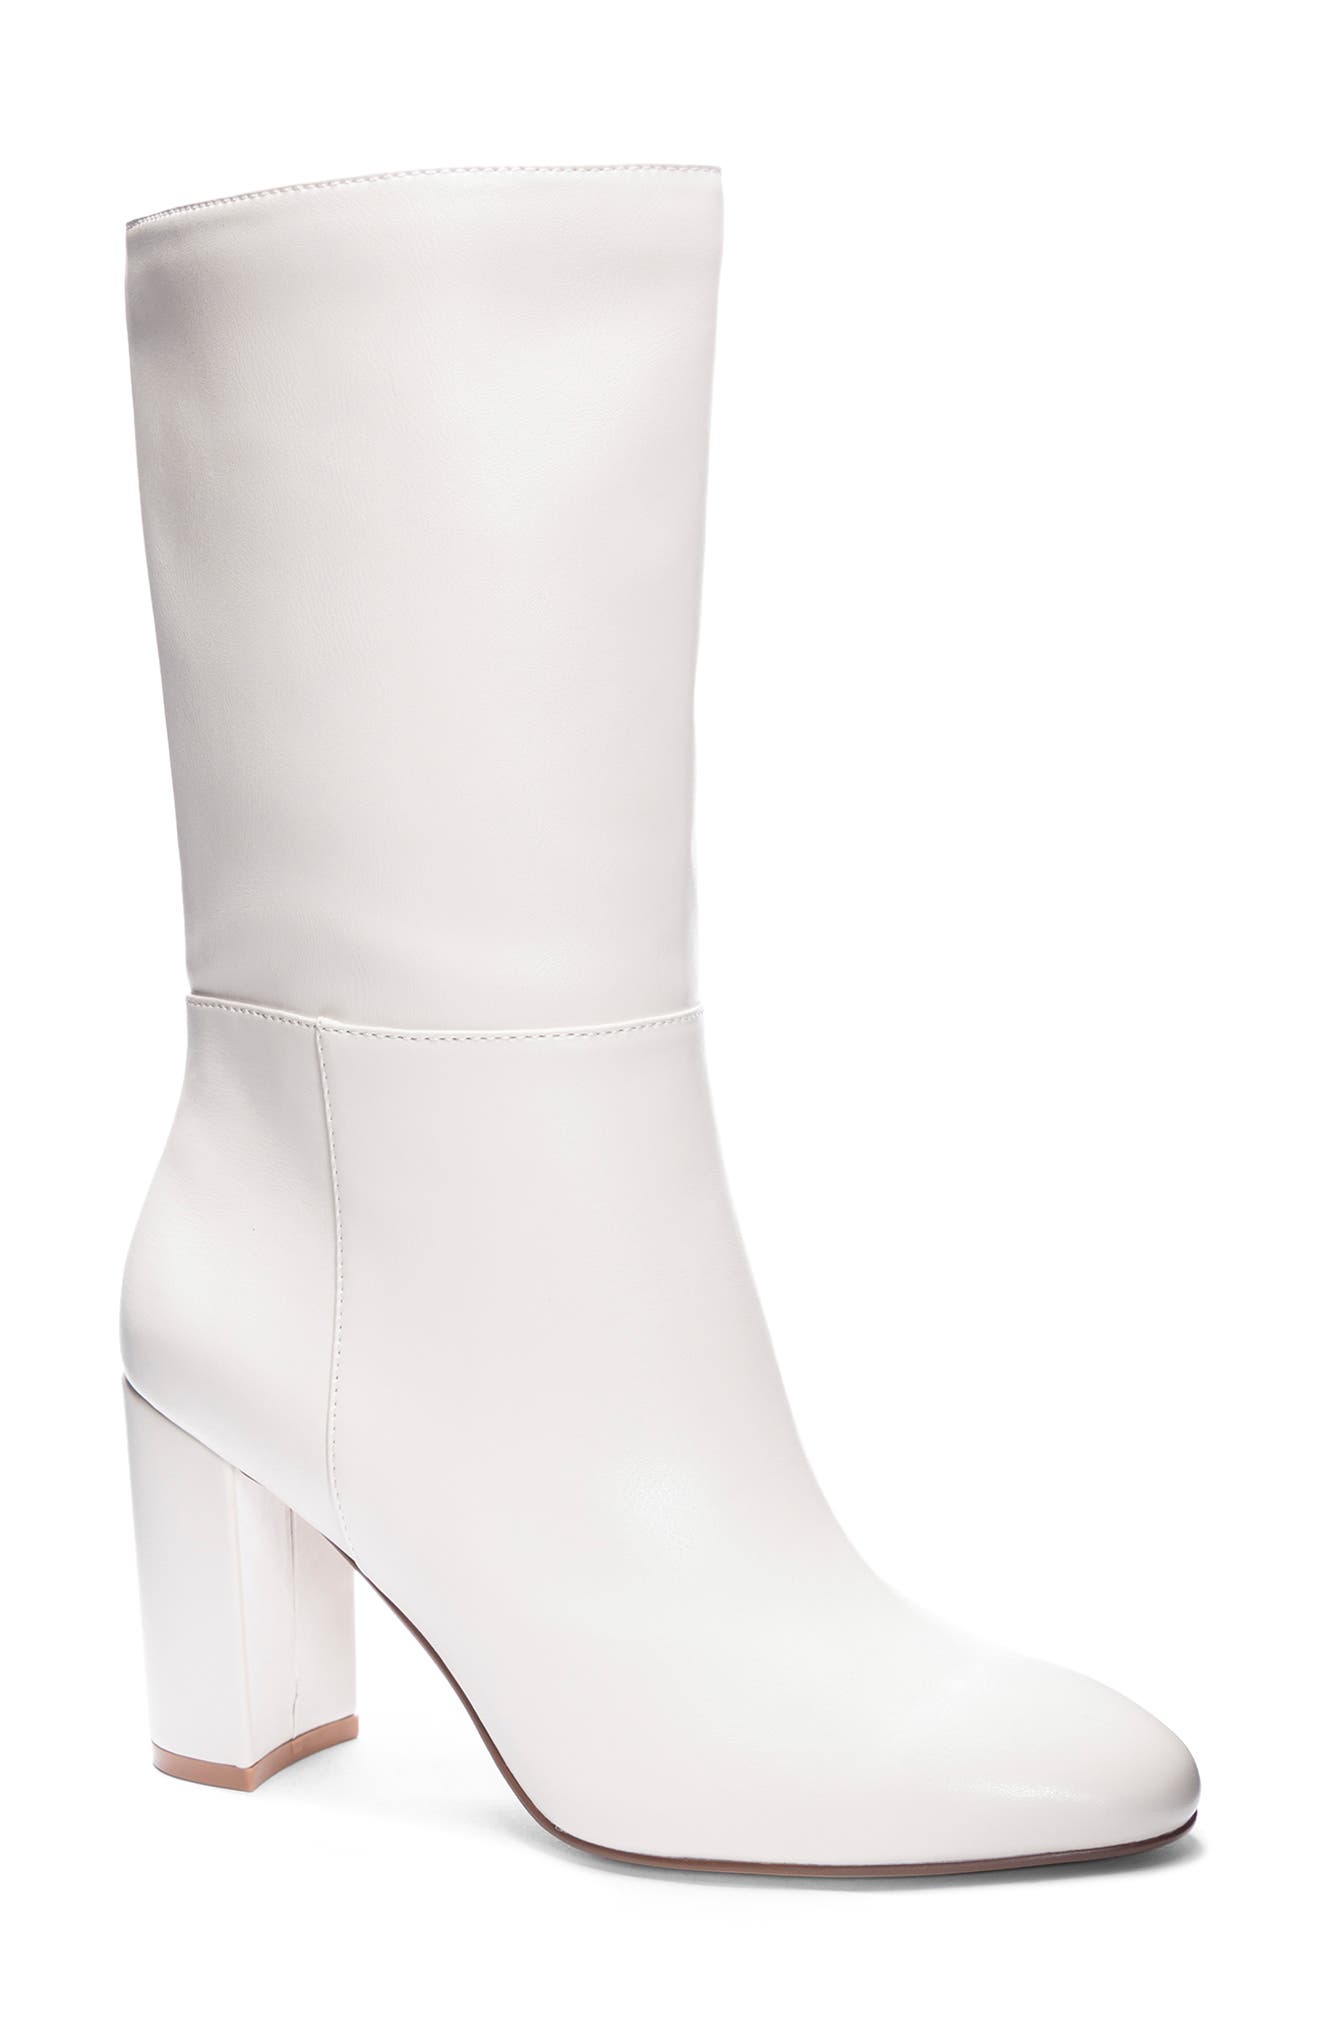 mid calf white boots